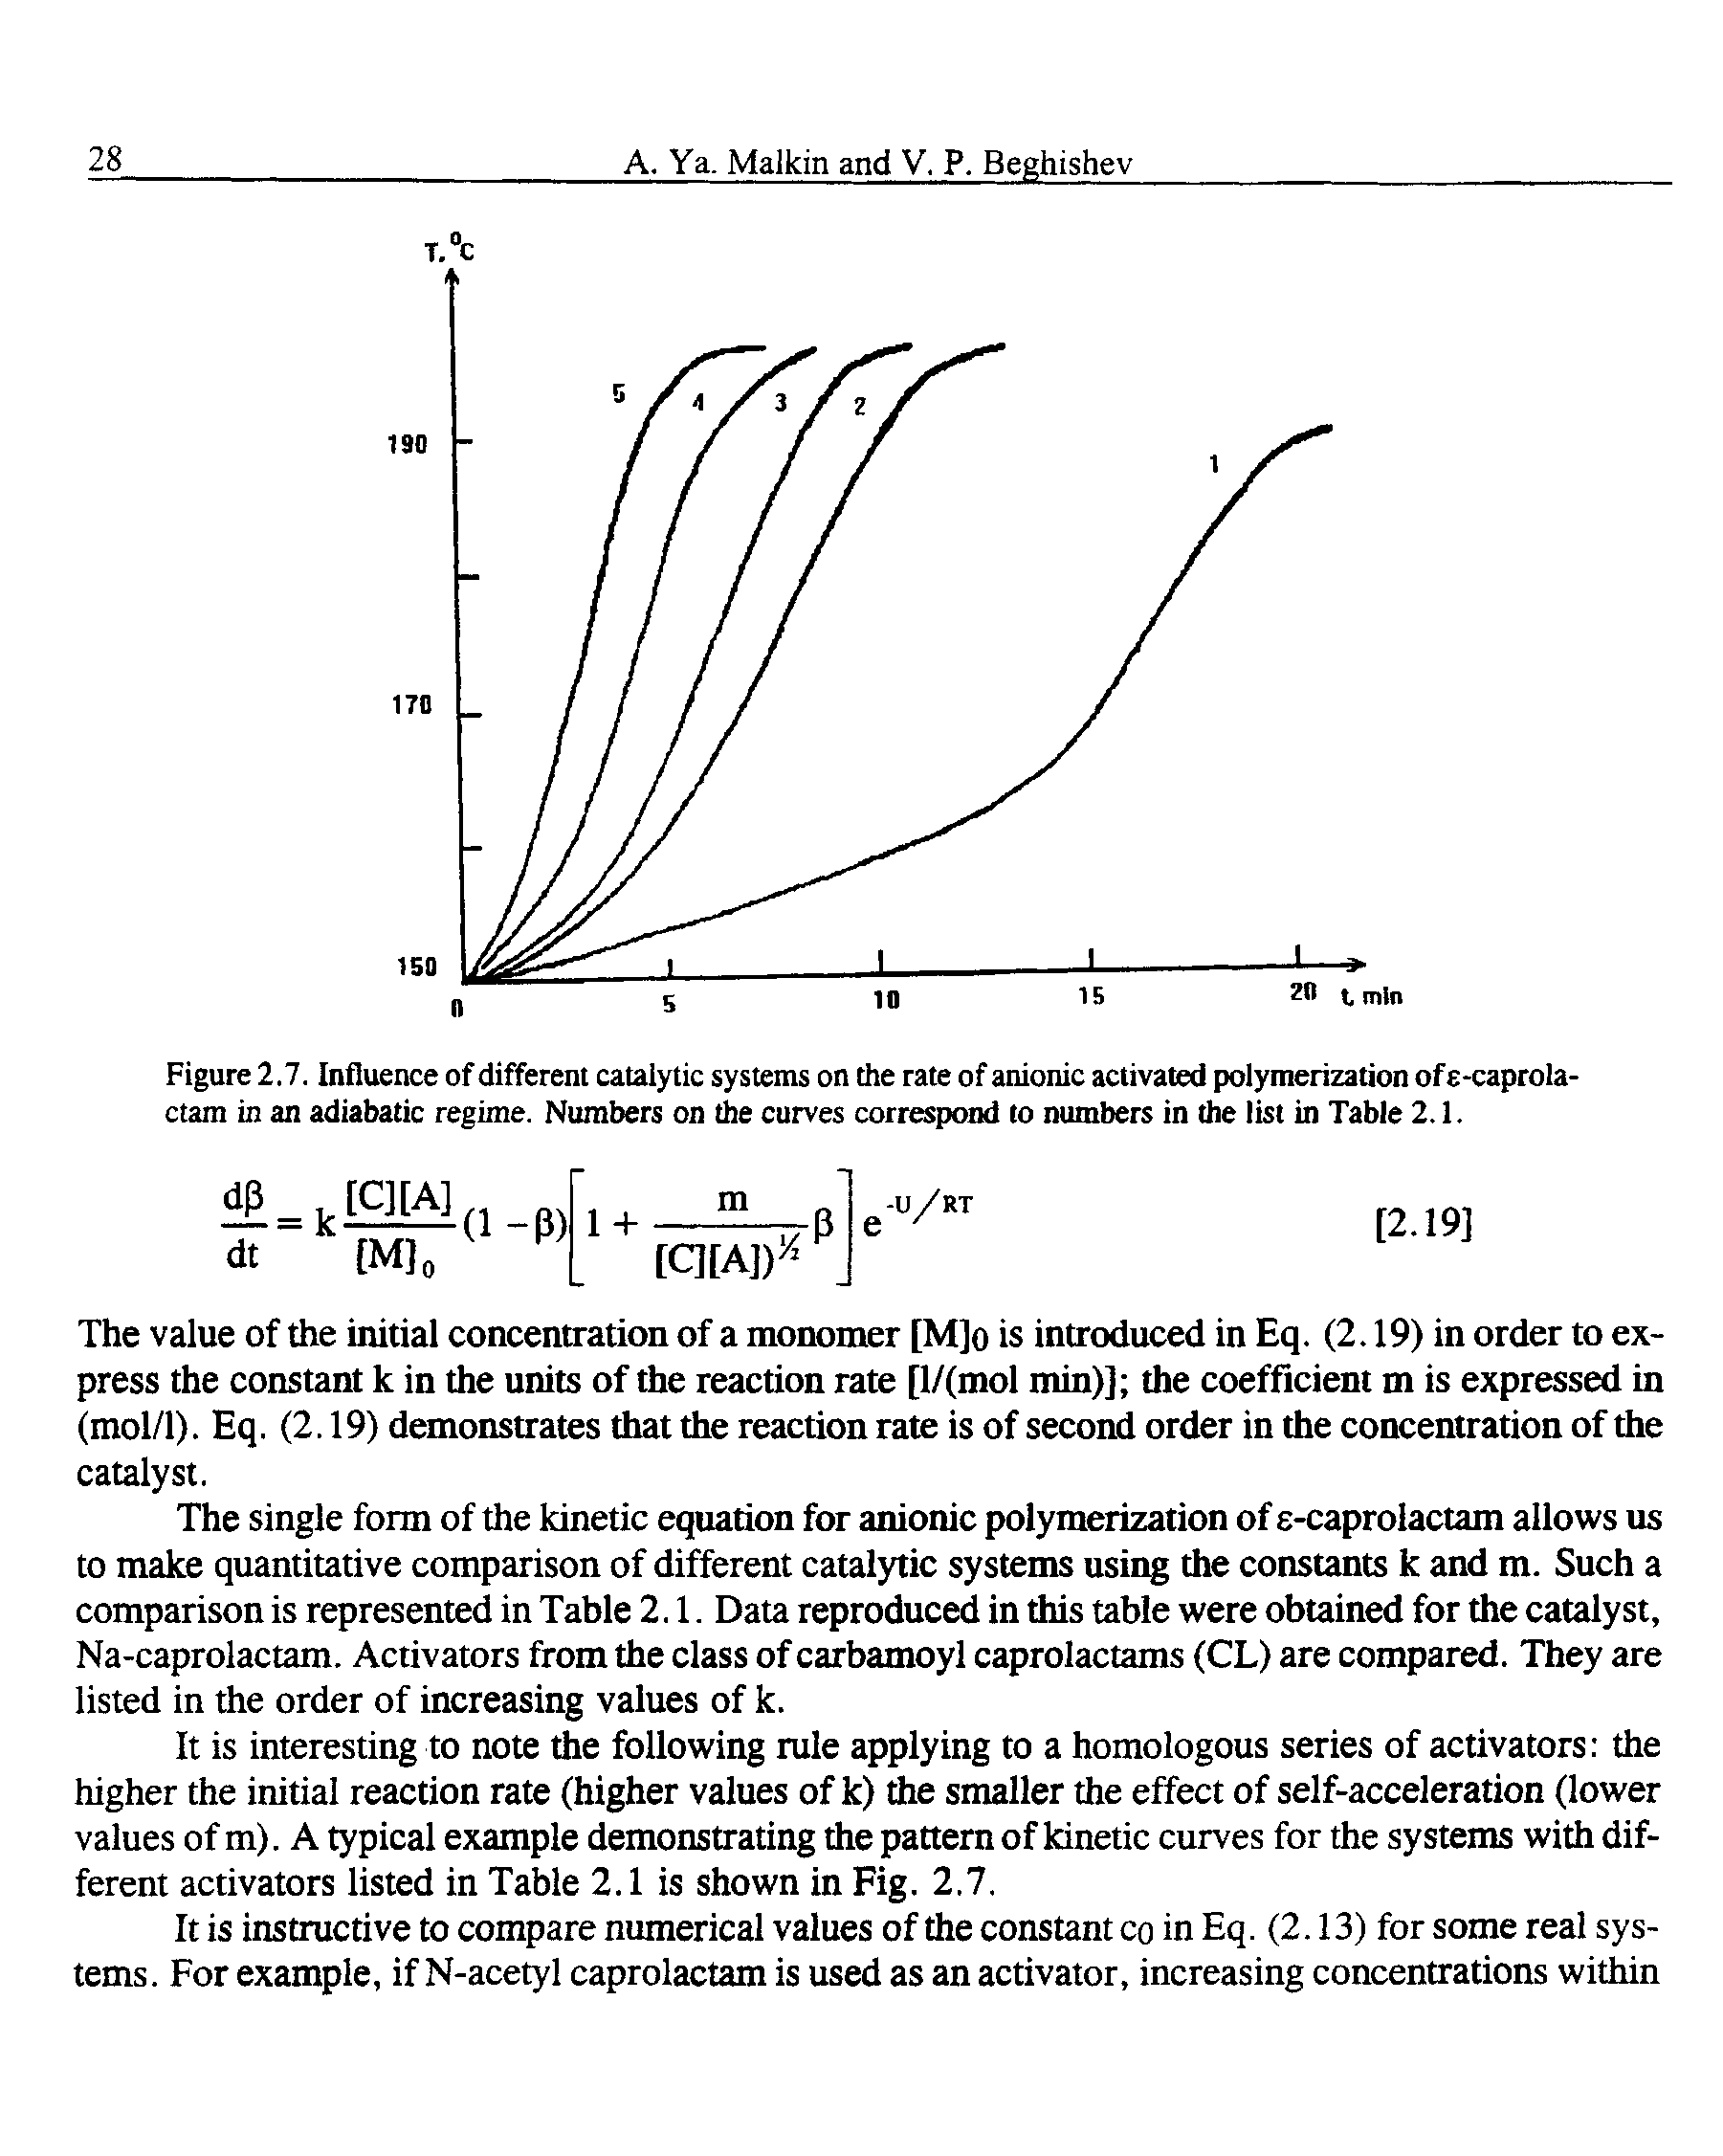 Figure 2.7. Influence of different catalytic systems on the rate of anionic activated polymerization ofs-caprola-ctam in an adiabatic regime. Numbers on the curves correspond to numbers in the list in Table 2.1.